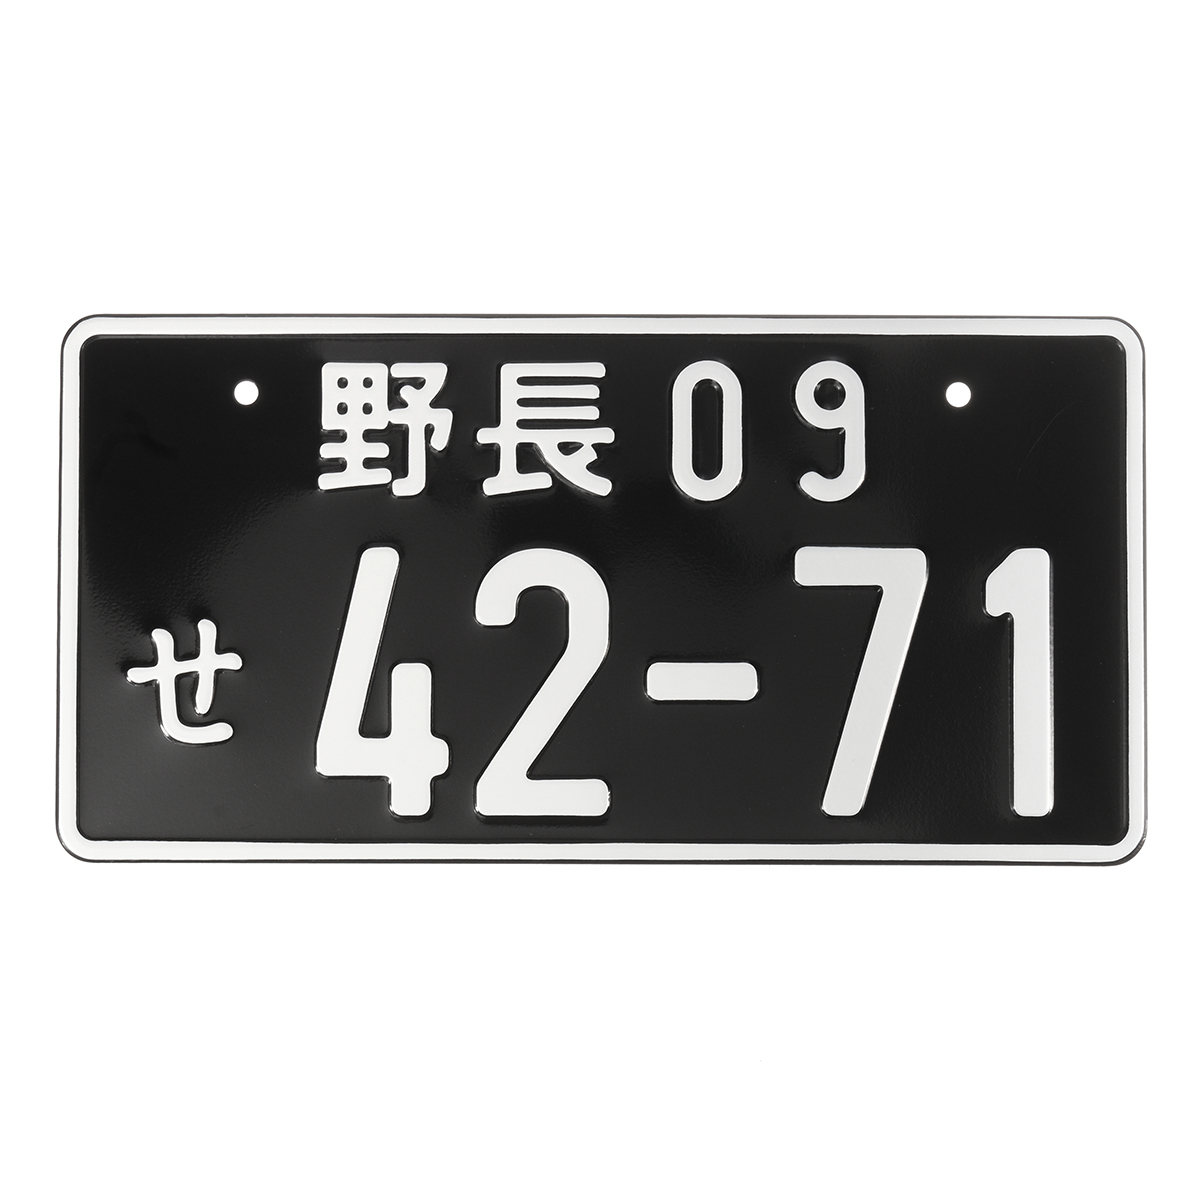 Universal Multiple Color Car Numbers Japanese Decorations License Plate Aluminum Tag for Jdm Kdm Racing Car Motorcycle